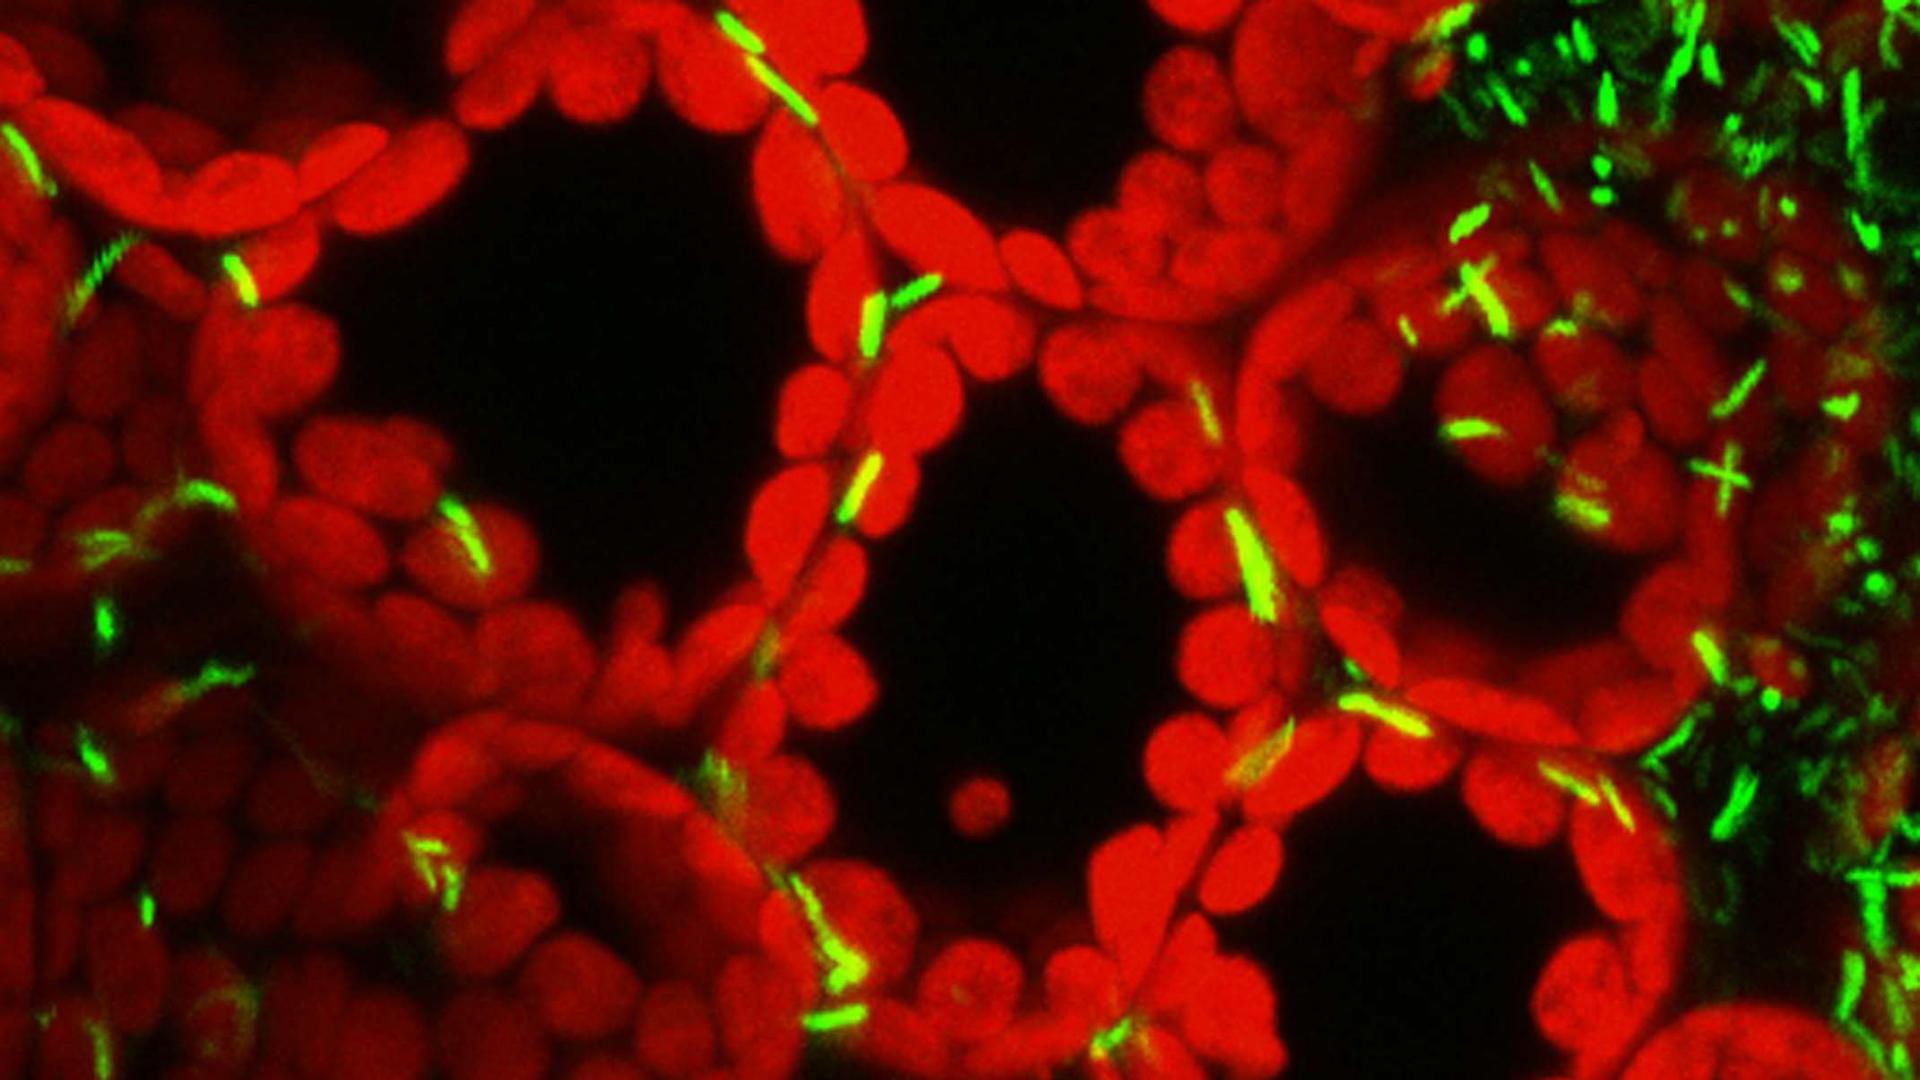 Plant Cells in red and green.